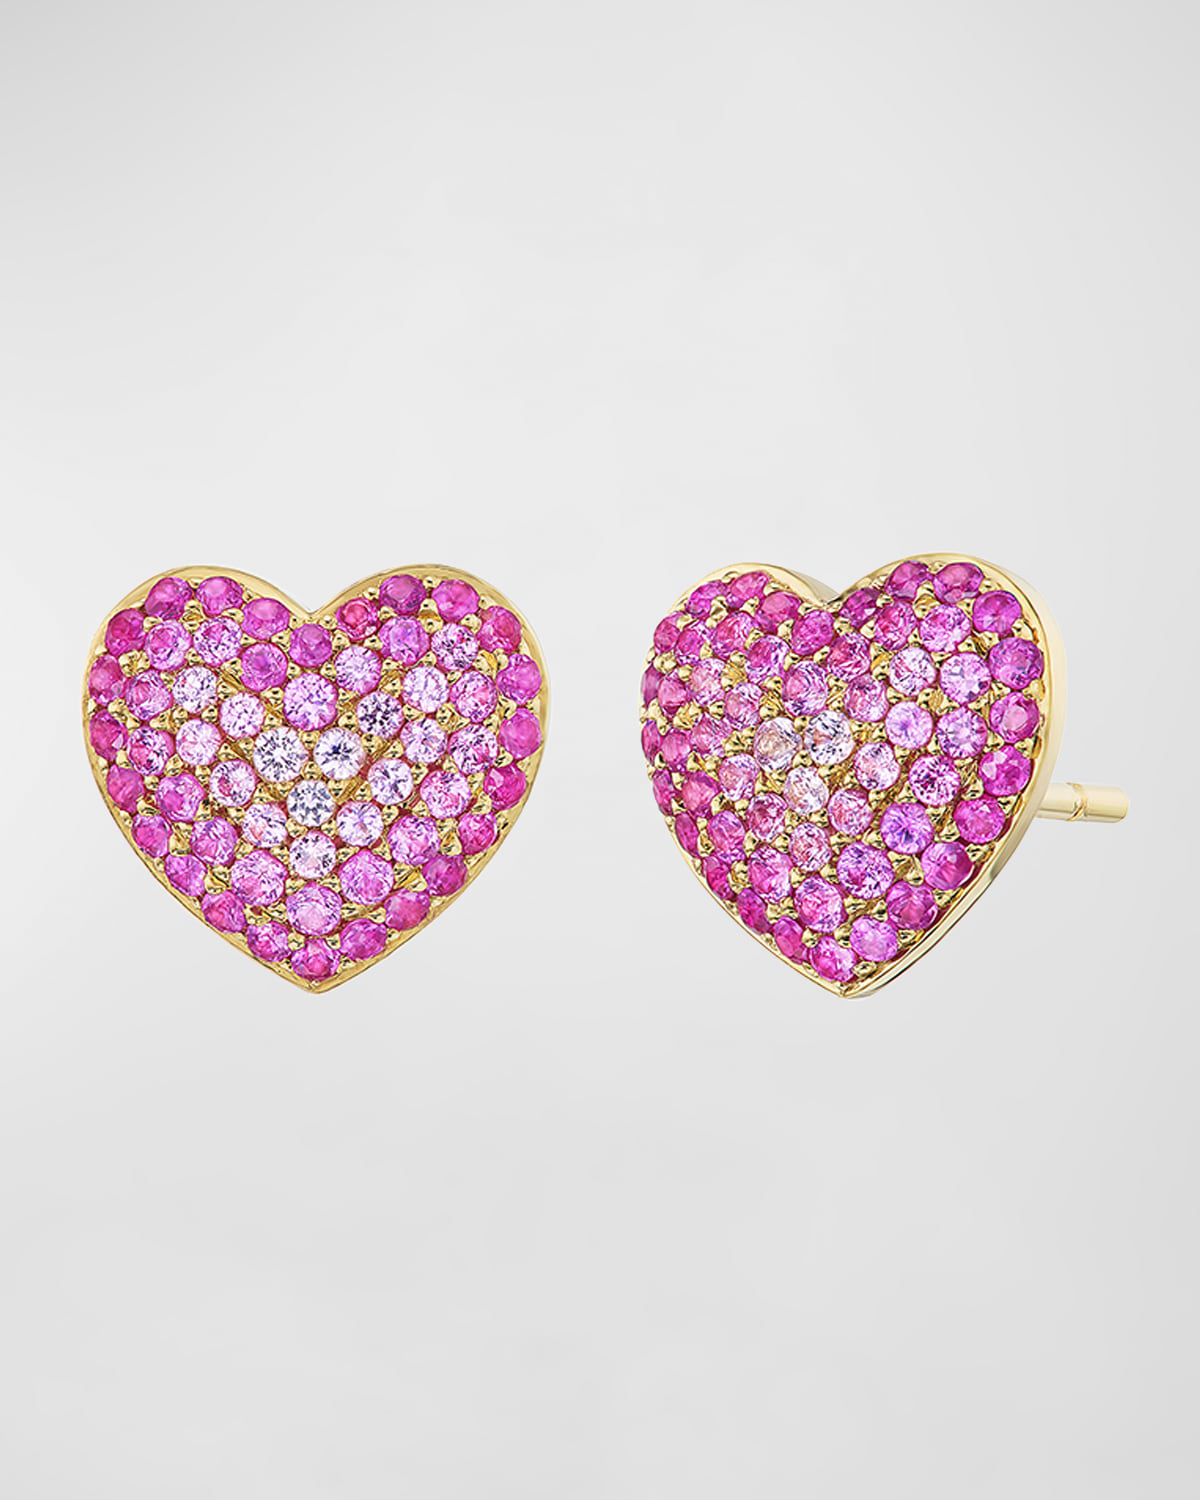 Emily P Wheeler Lucy Stud Earrings In 18k Yellow Gold And Pink Sapphires